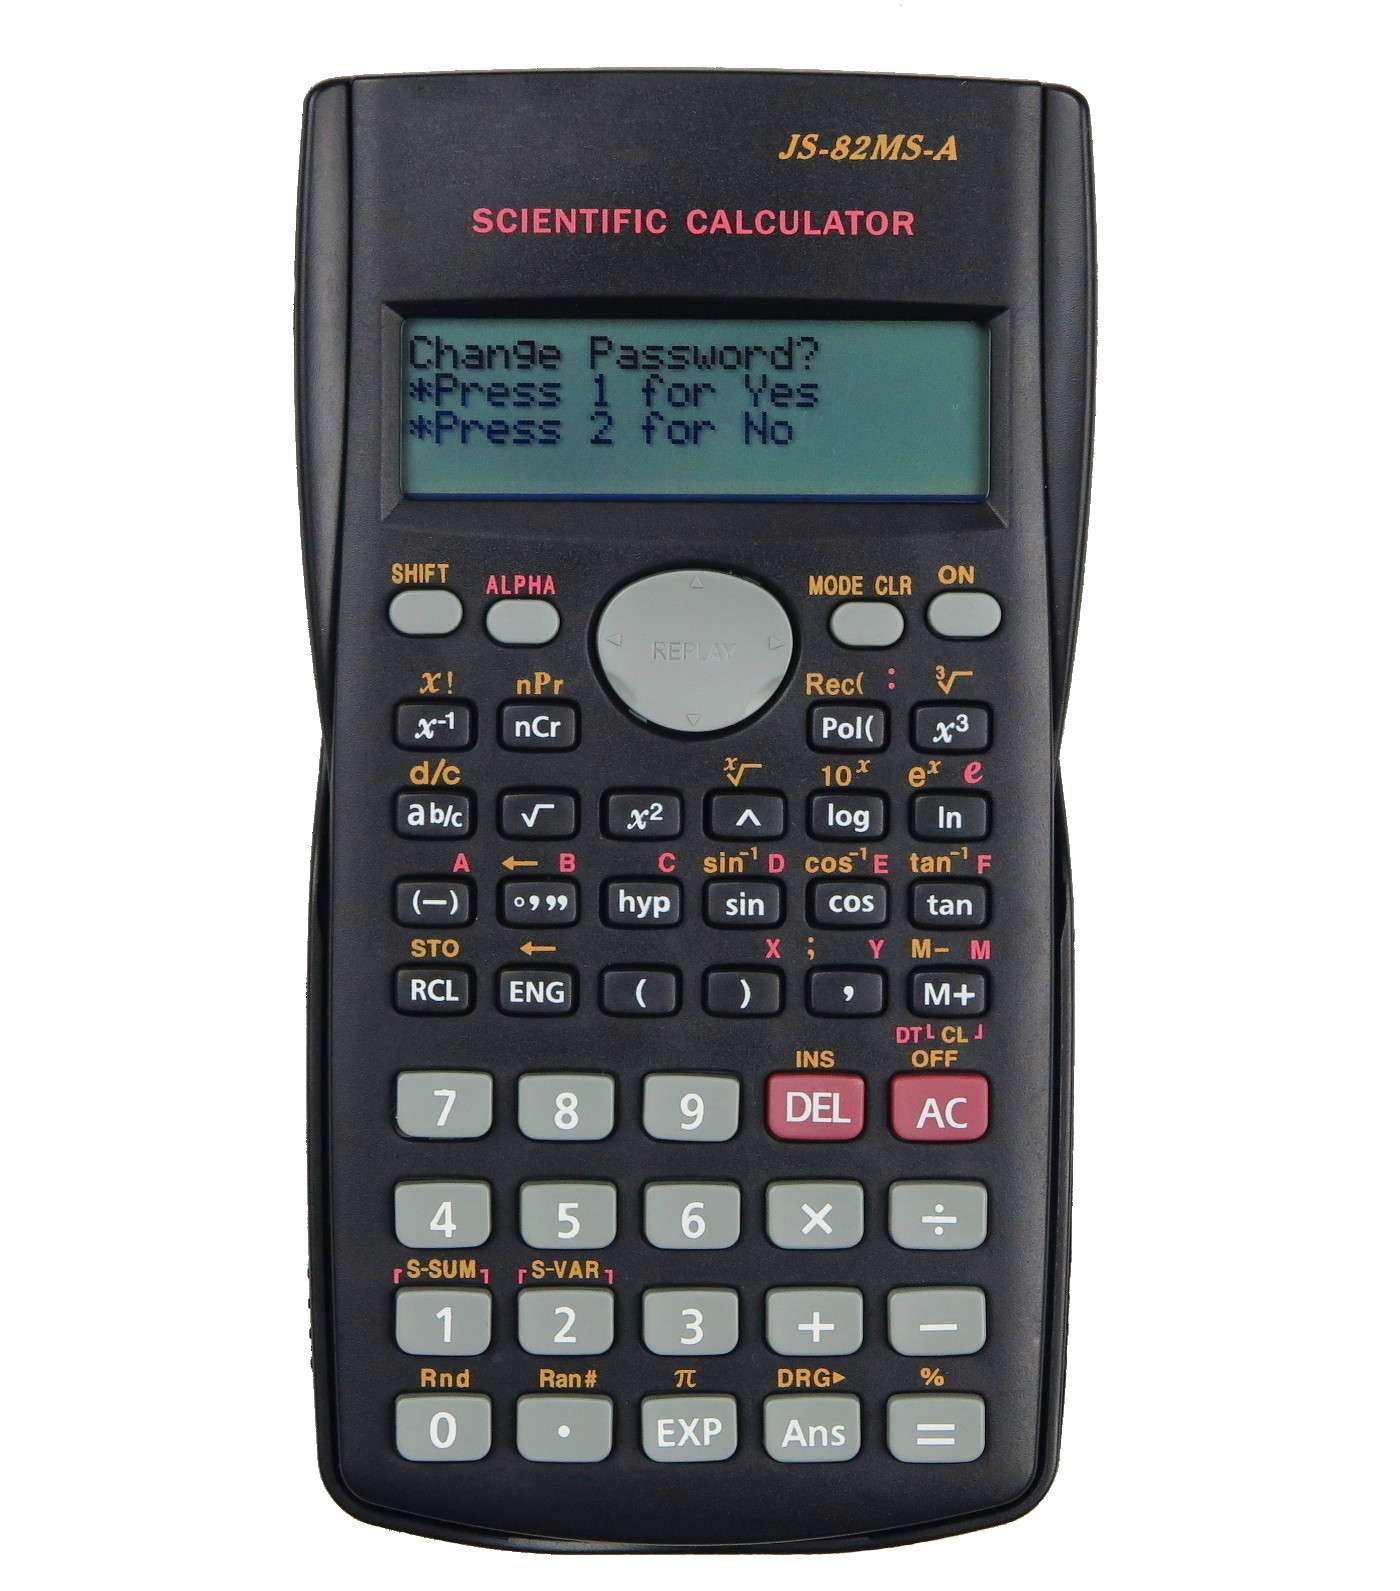 Take off the Ruby Devices Logo to reveal a scientific calculator